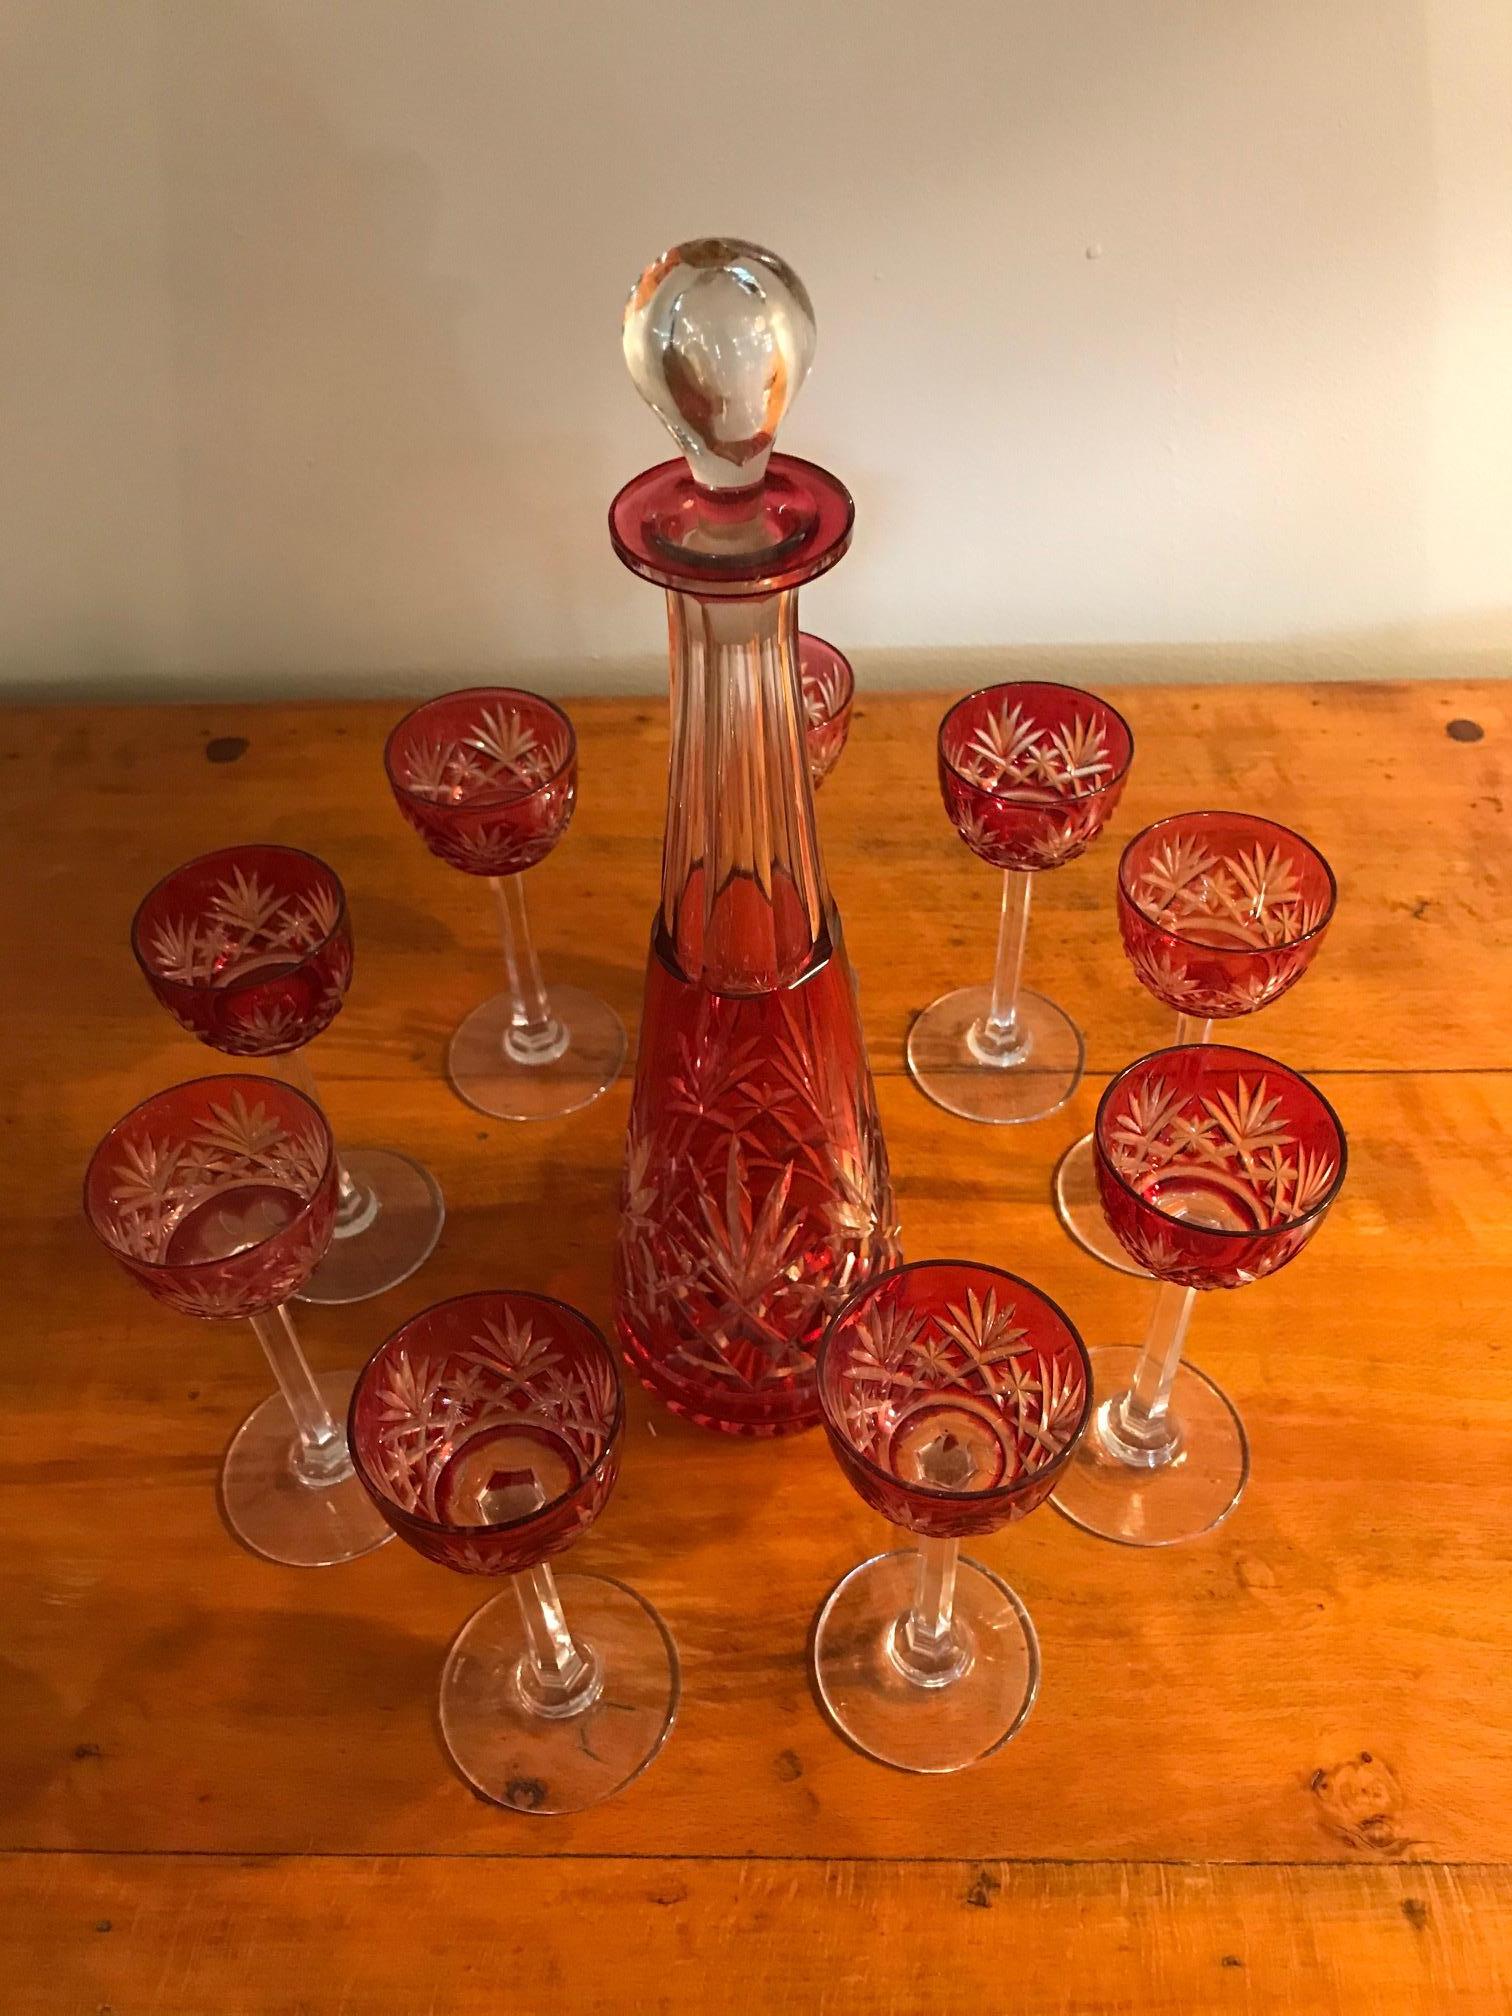 Beautiful 20th century Bohemia crystal set of nine liquor glasses and a decanter from the 1930s.
Nice red color and elegant pattern and shape.
The plug is removable.
Nice quality.